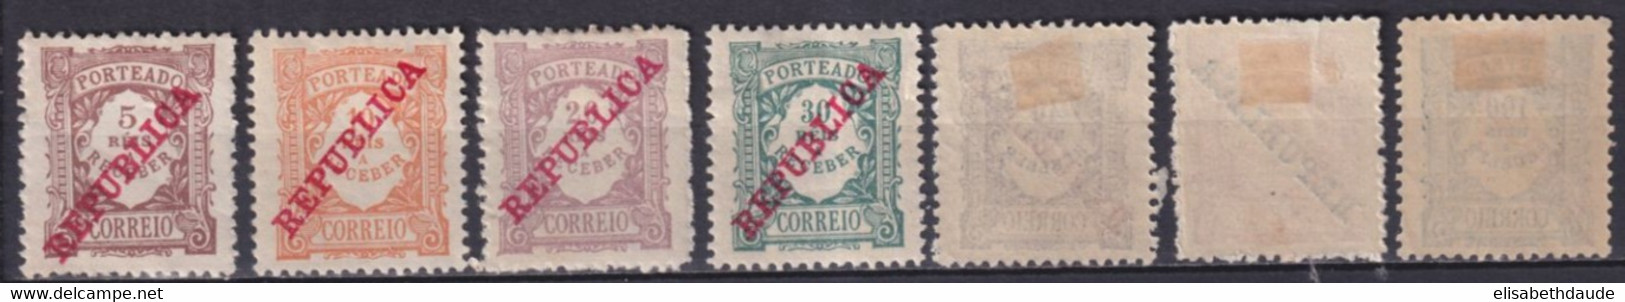 PORTUGAL - 1910 - SERIE COMPLETE TAXE YVERT N° 14/20 * MH - COTE = 20 EUR - Nuevos